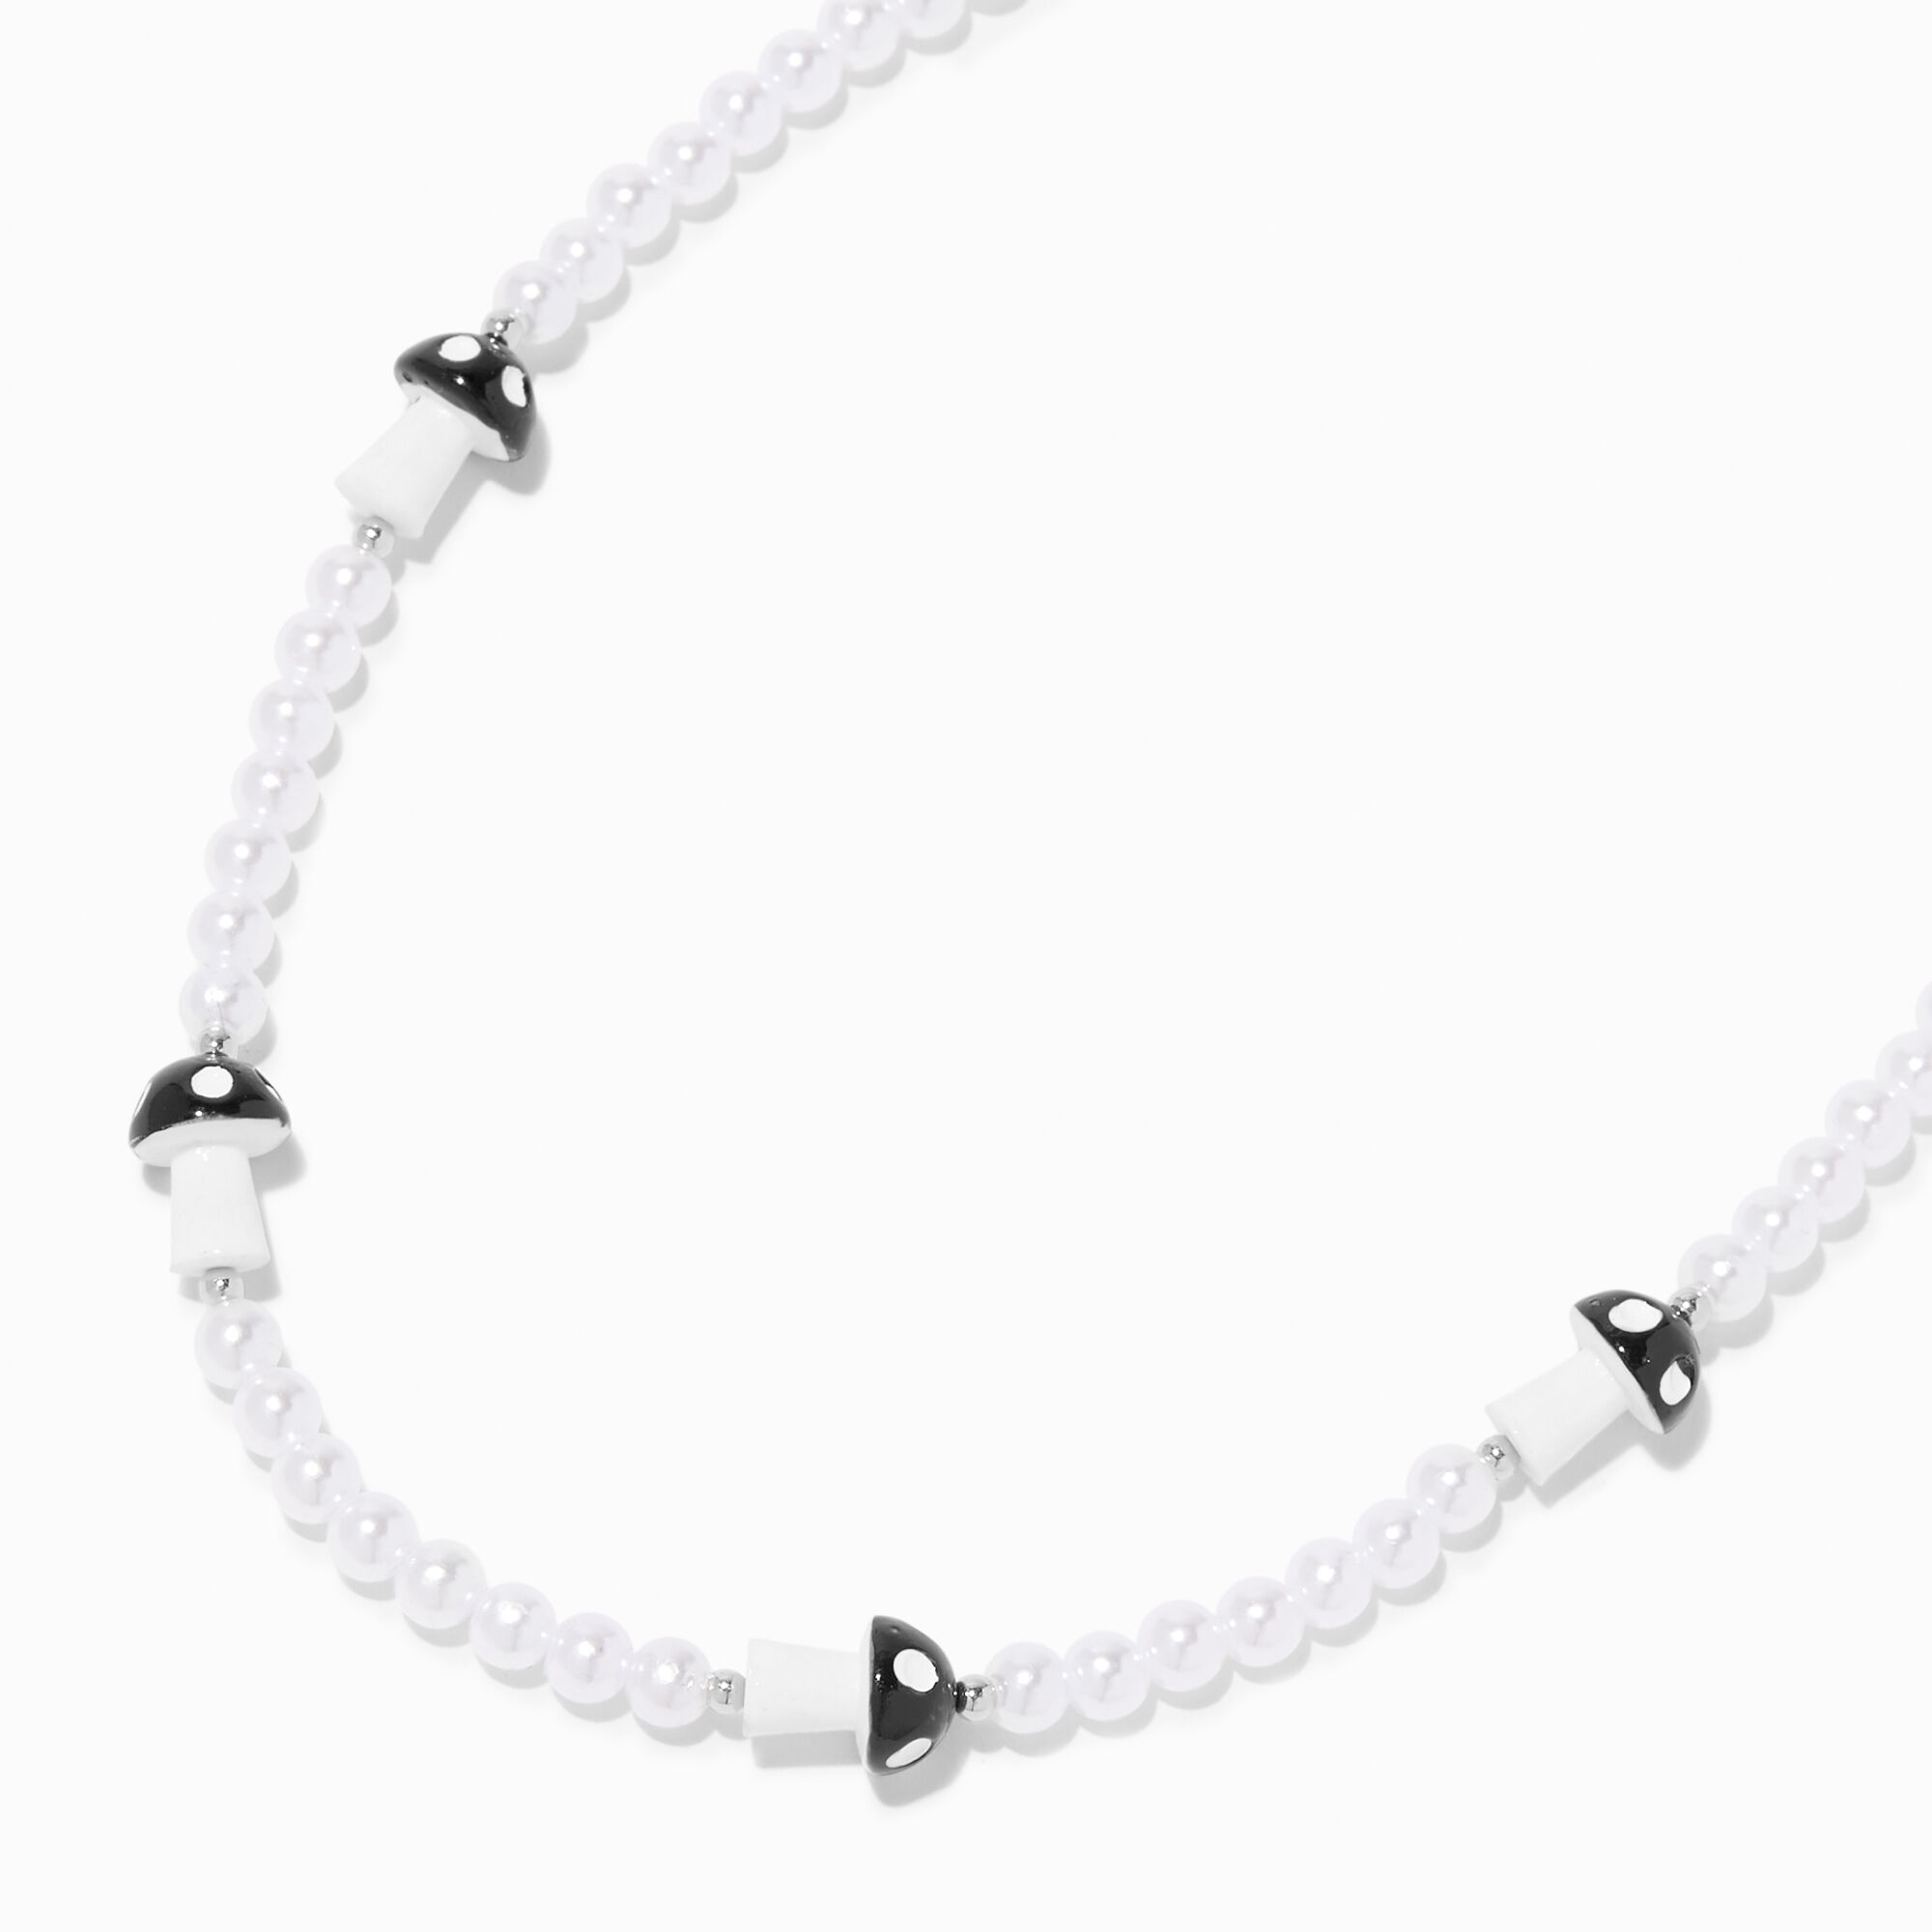 View Claires Mushroom Beaded Pearl Choker Necklace Black information